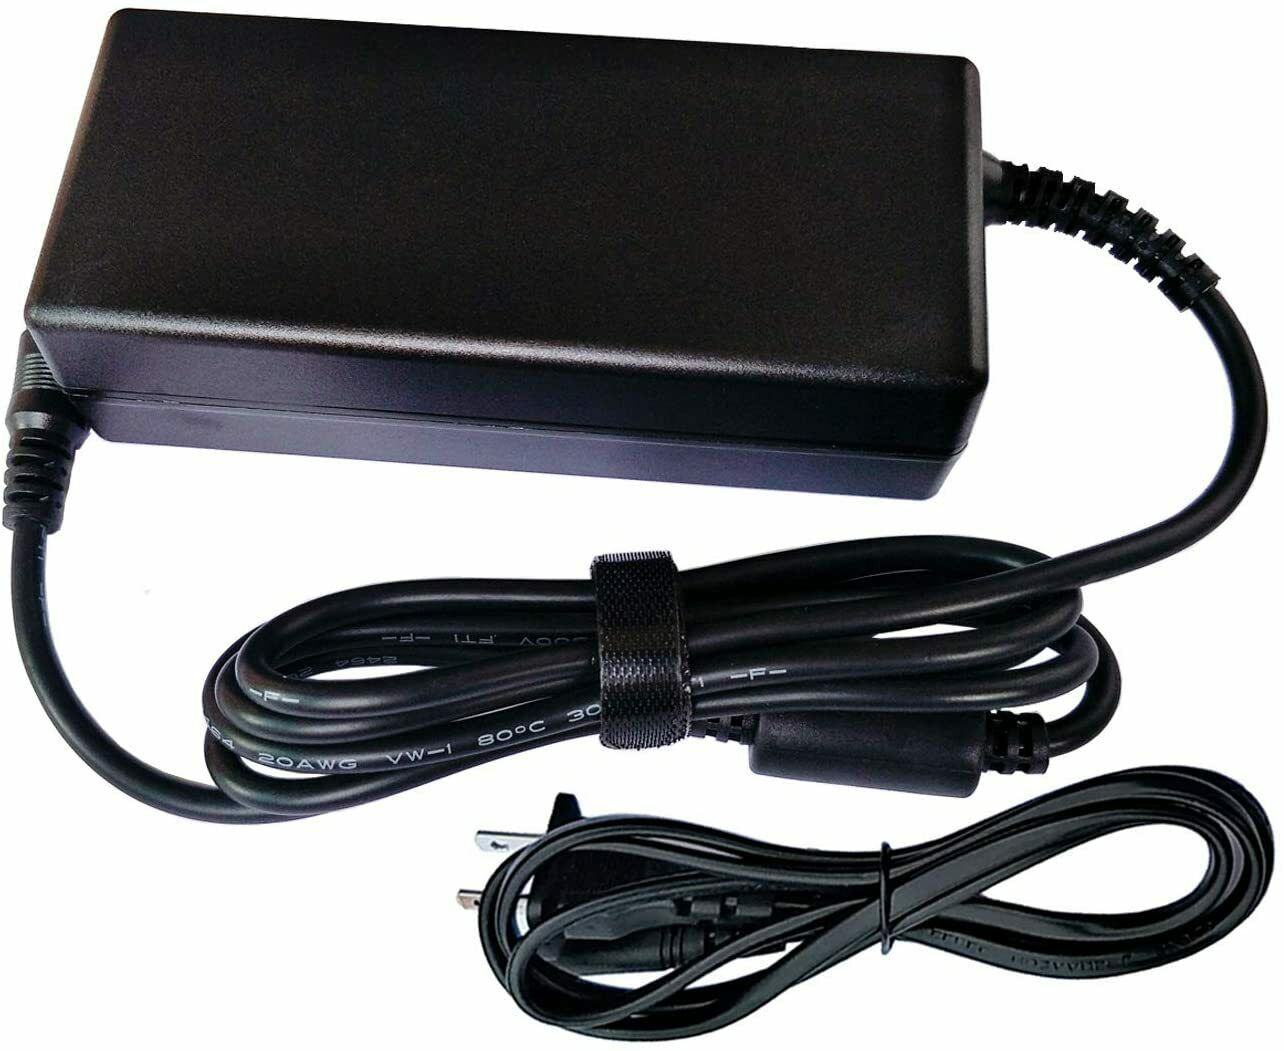 *Brand NEW*For Toy Transformer XKD-Z2500NHS24.0-60W Power Supply Cord 24V AC/DC Adapter